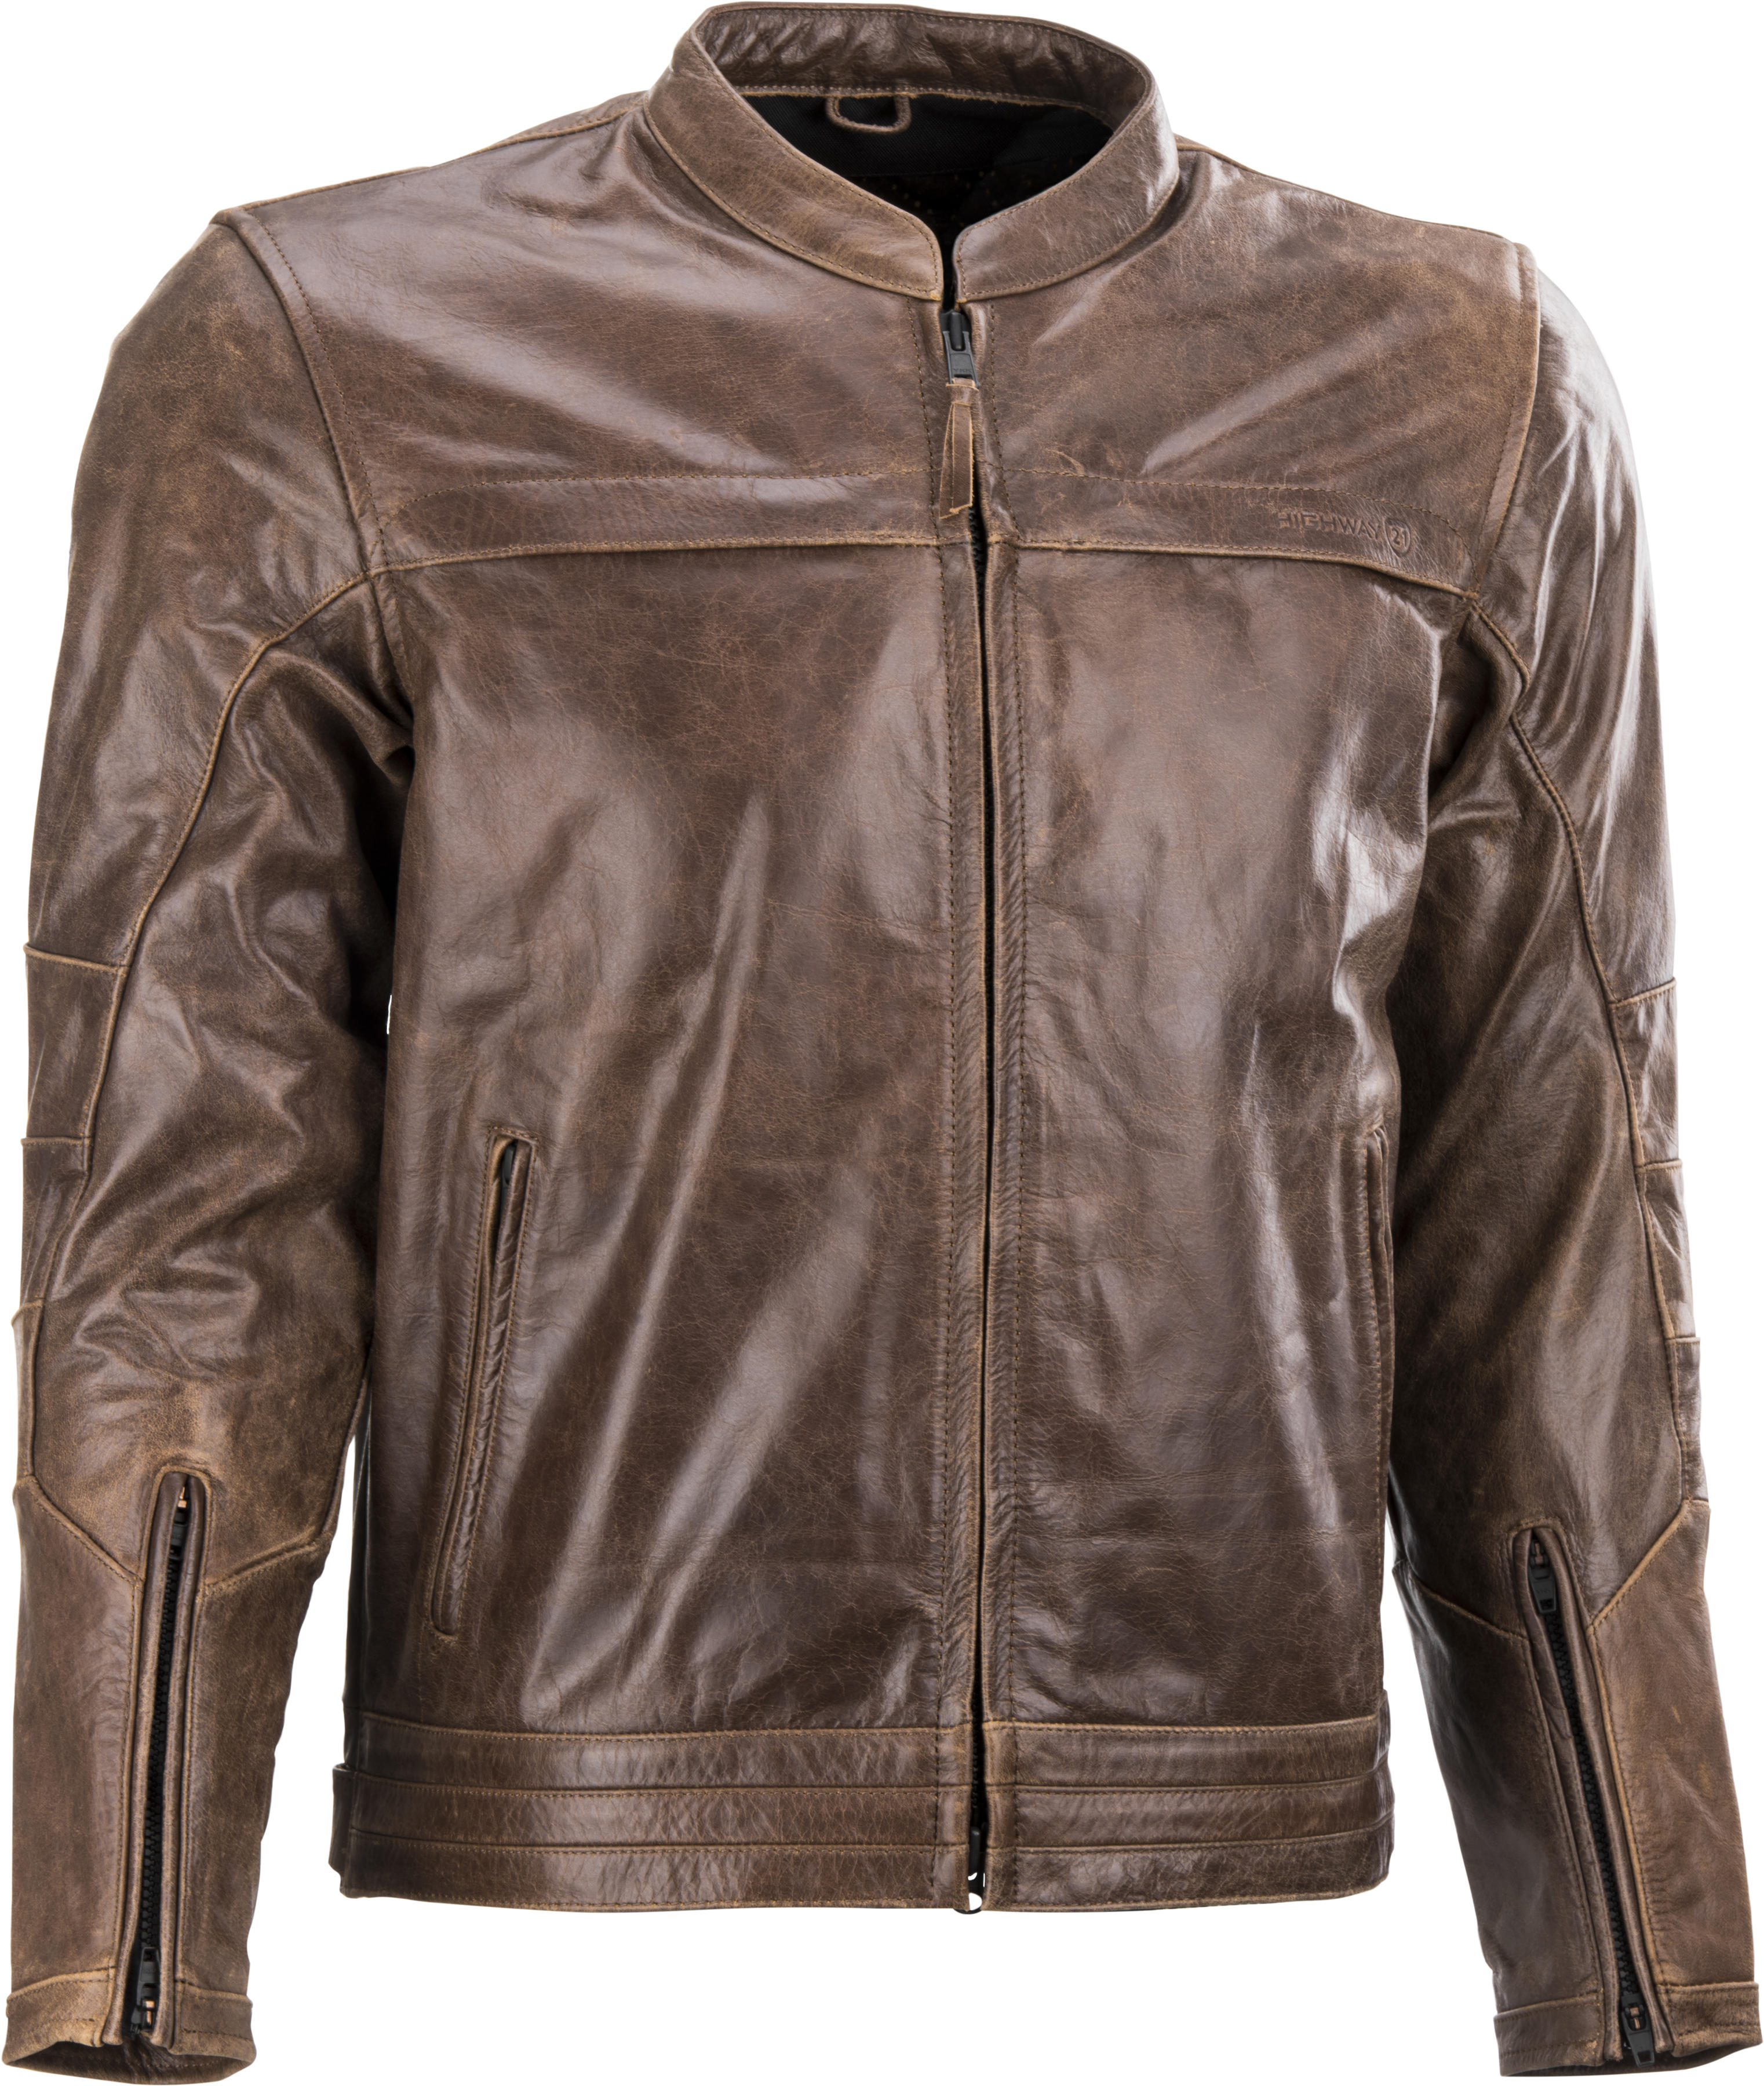 Primer Riding Jacket Brown 4X-Large - Click Image to Close